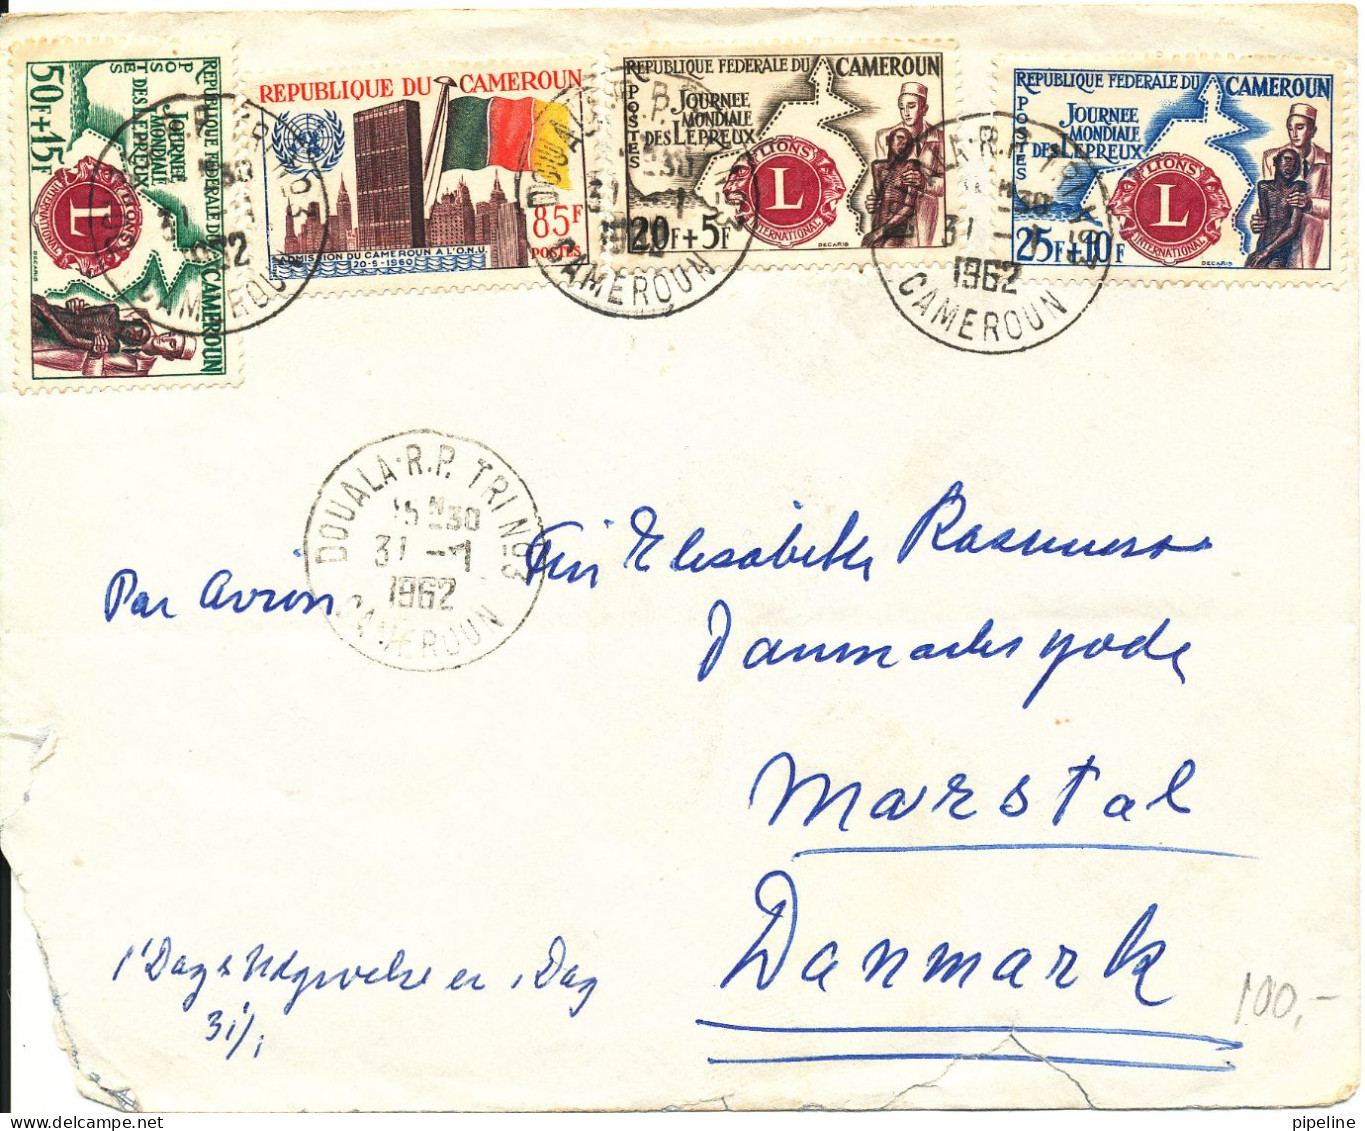 Cameroun Cover/FDC Sent To Denmark 31-1-1962 Single Franked Cover Damaged By Opening - Covers & Documents